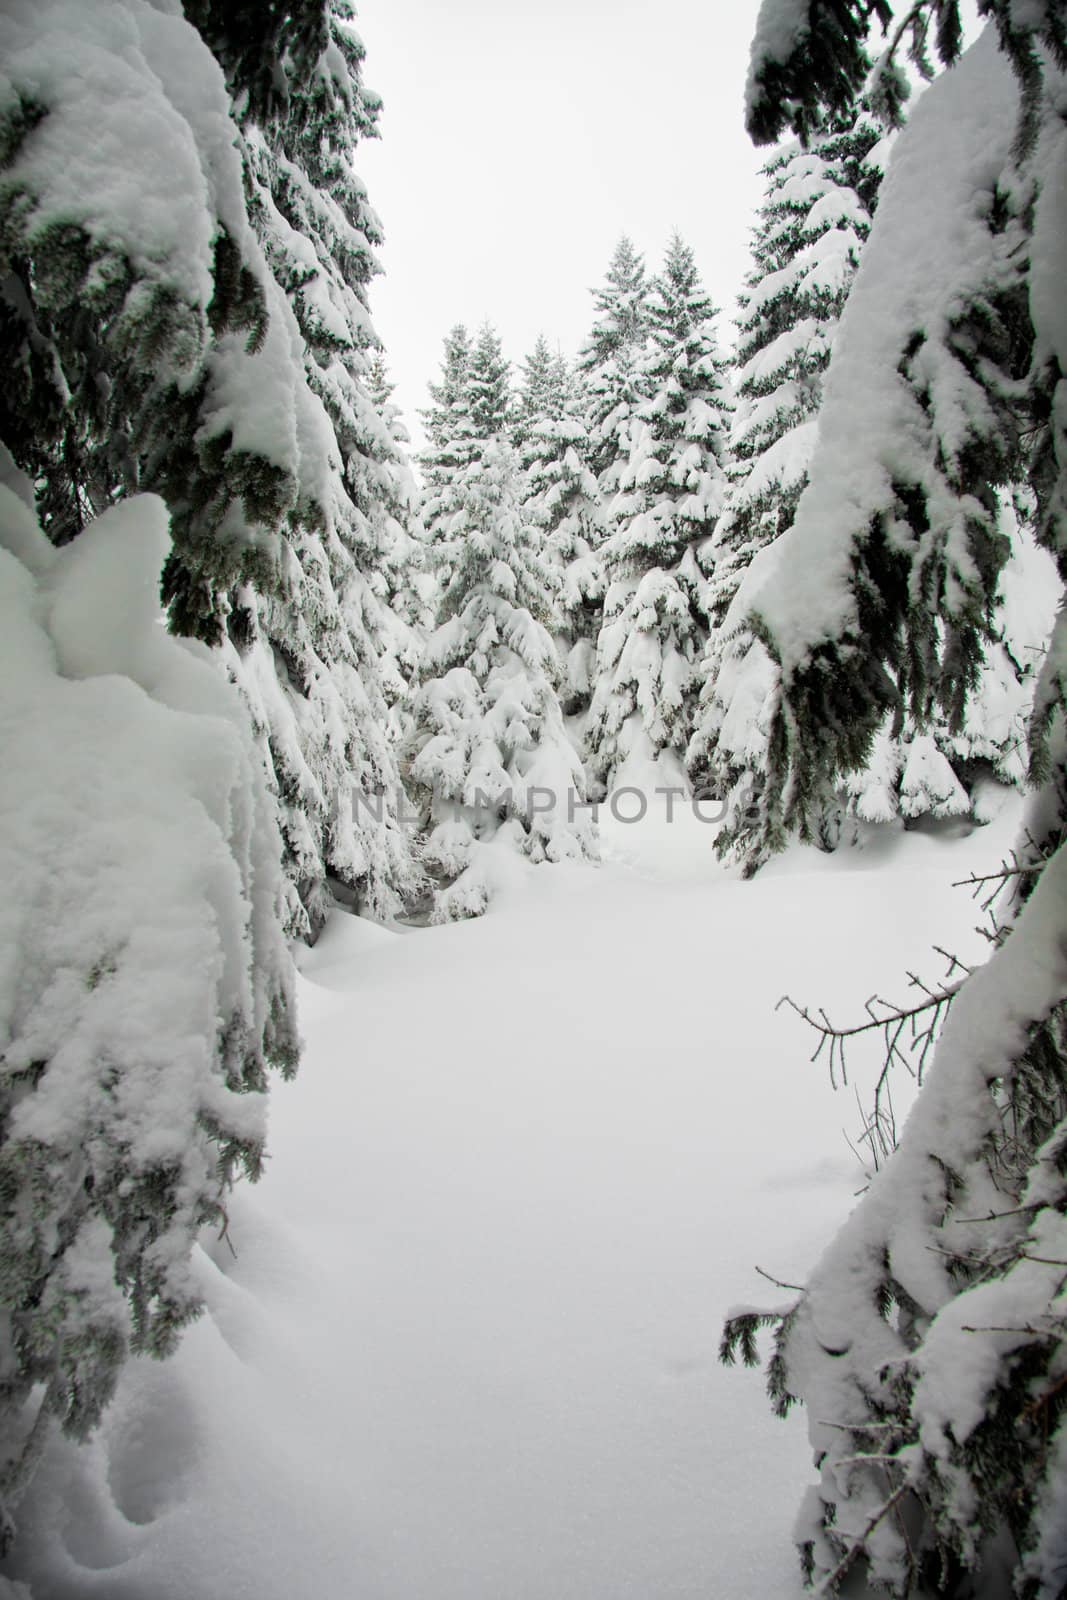 Fir trees with lots of snow, vertical by Lamarinx